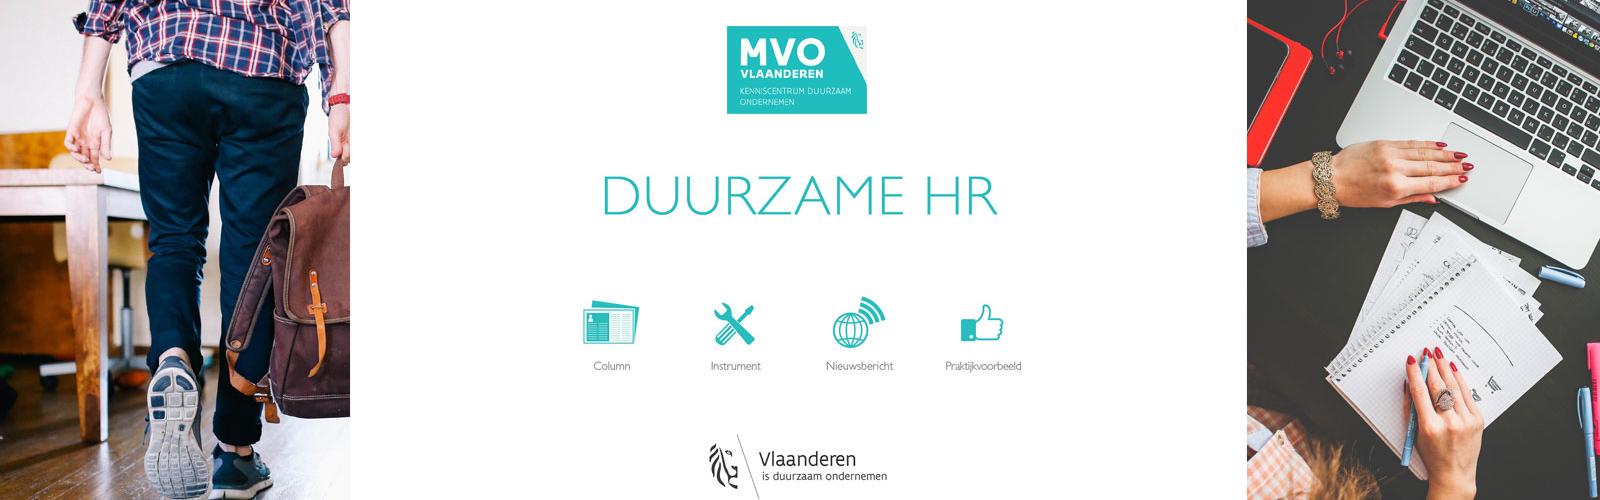 Coverbeeld dossier duurzame HR